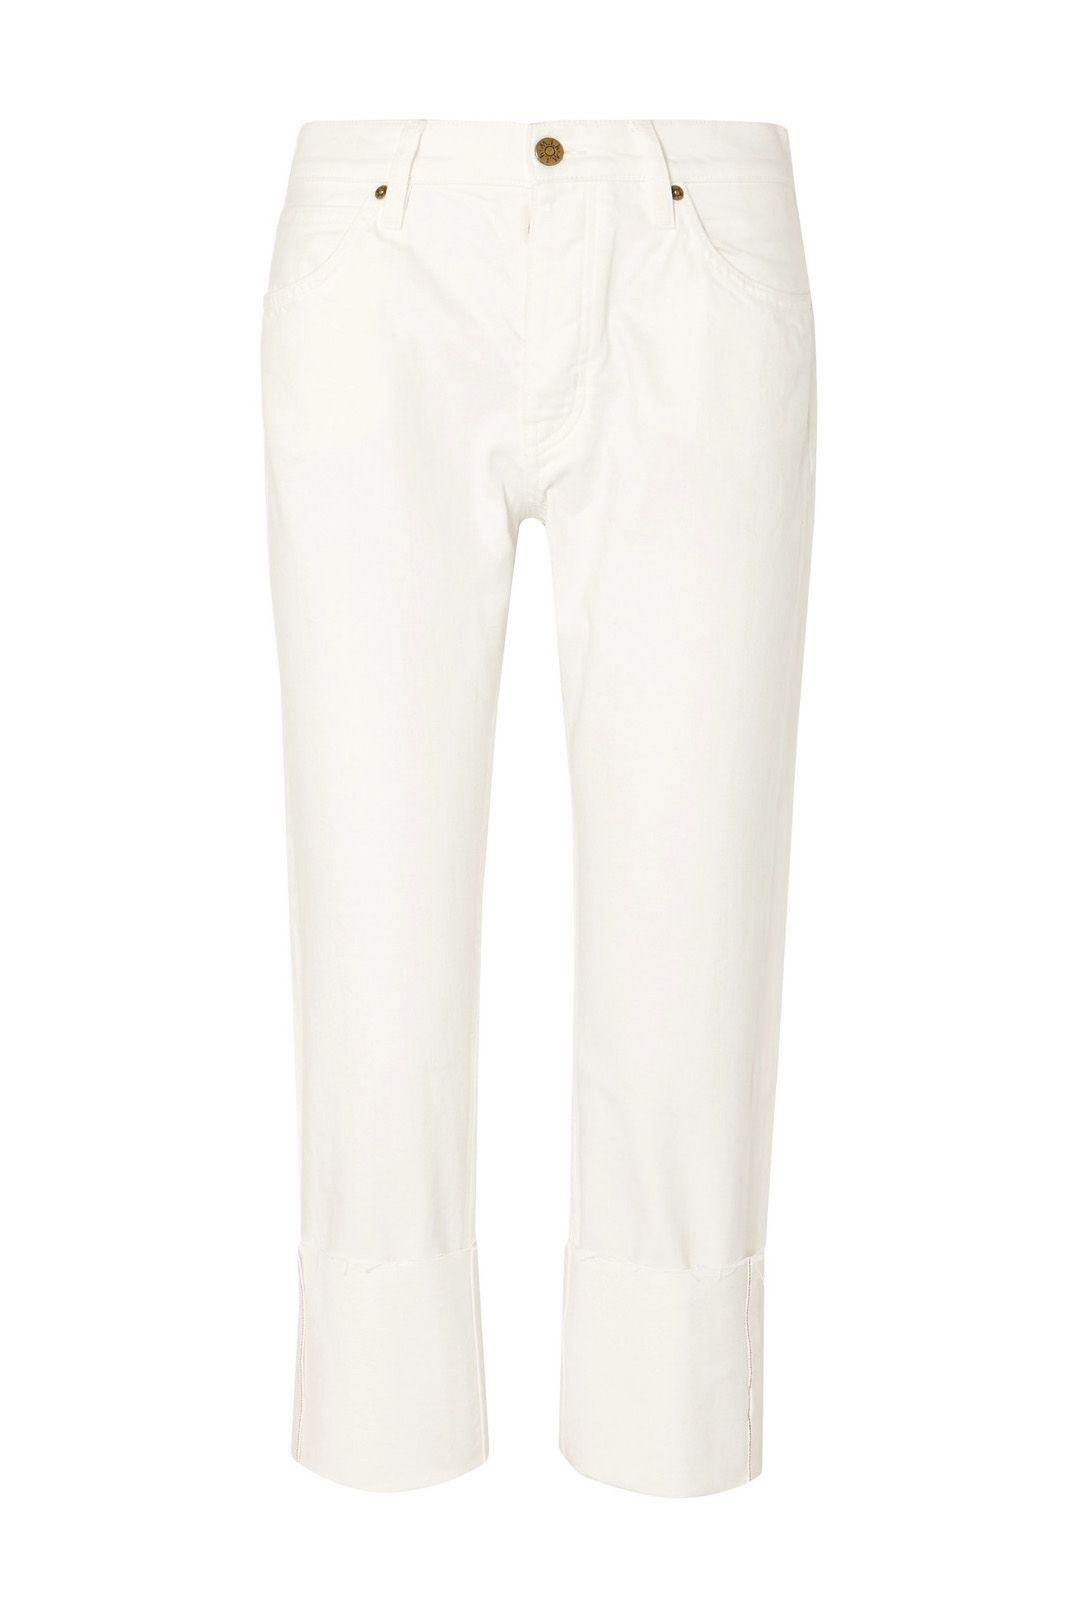 best white cropped jeans